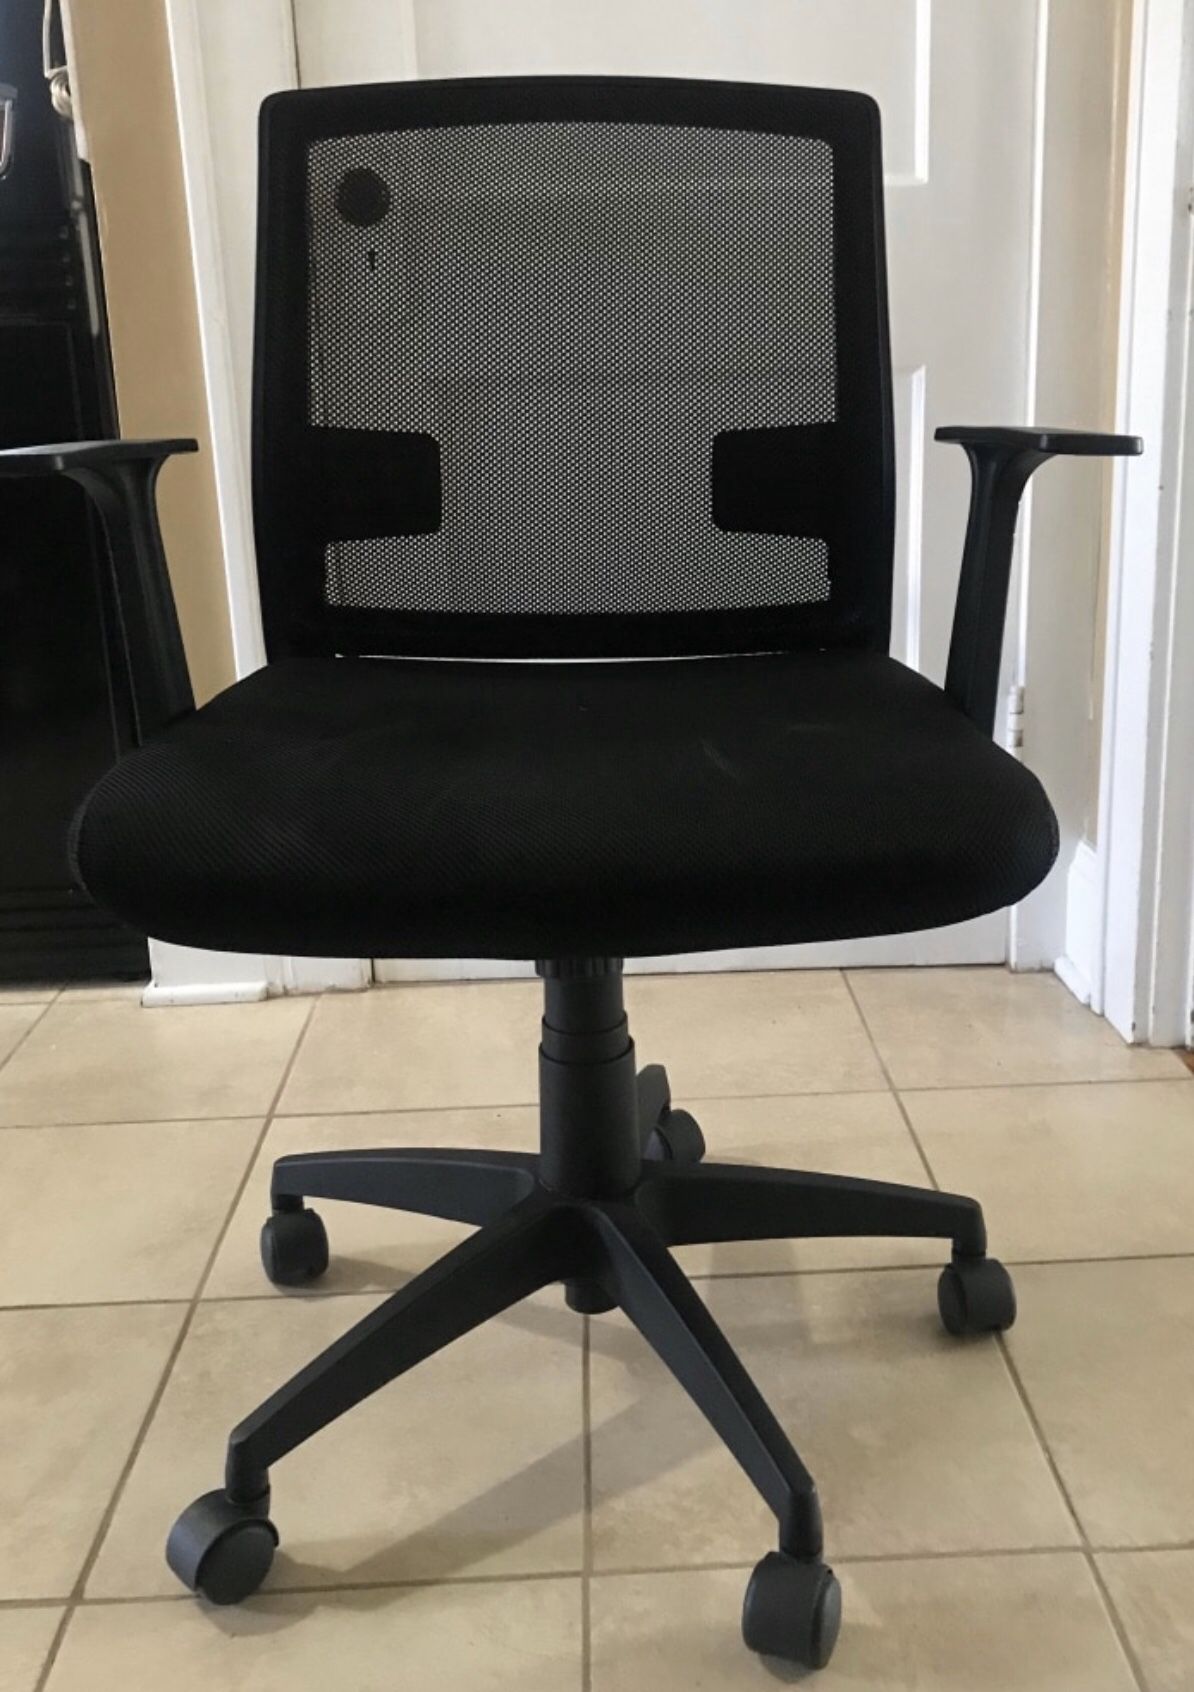 Adjustable office chair. Gently used.